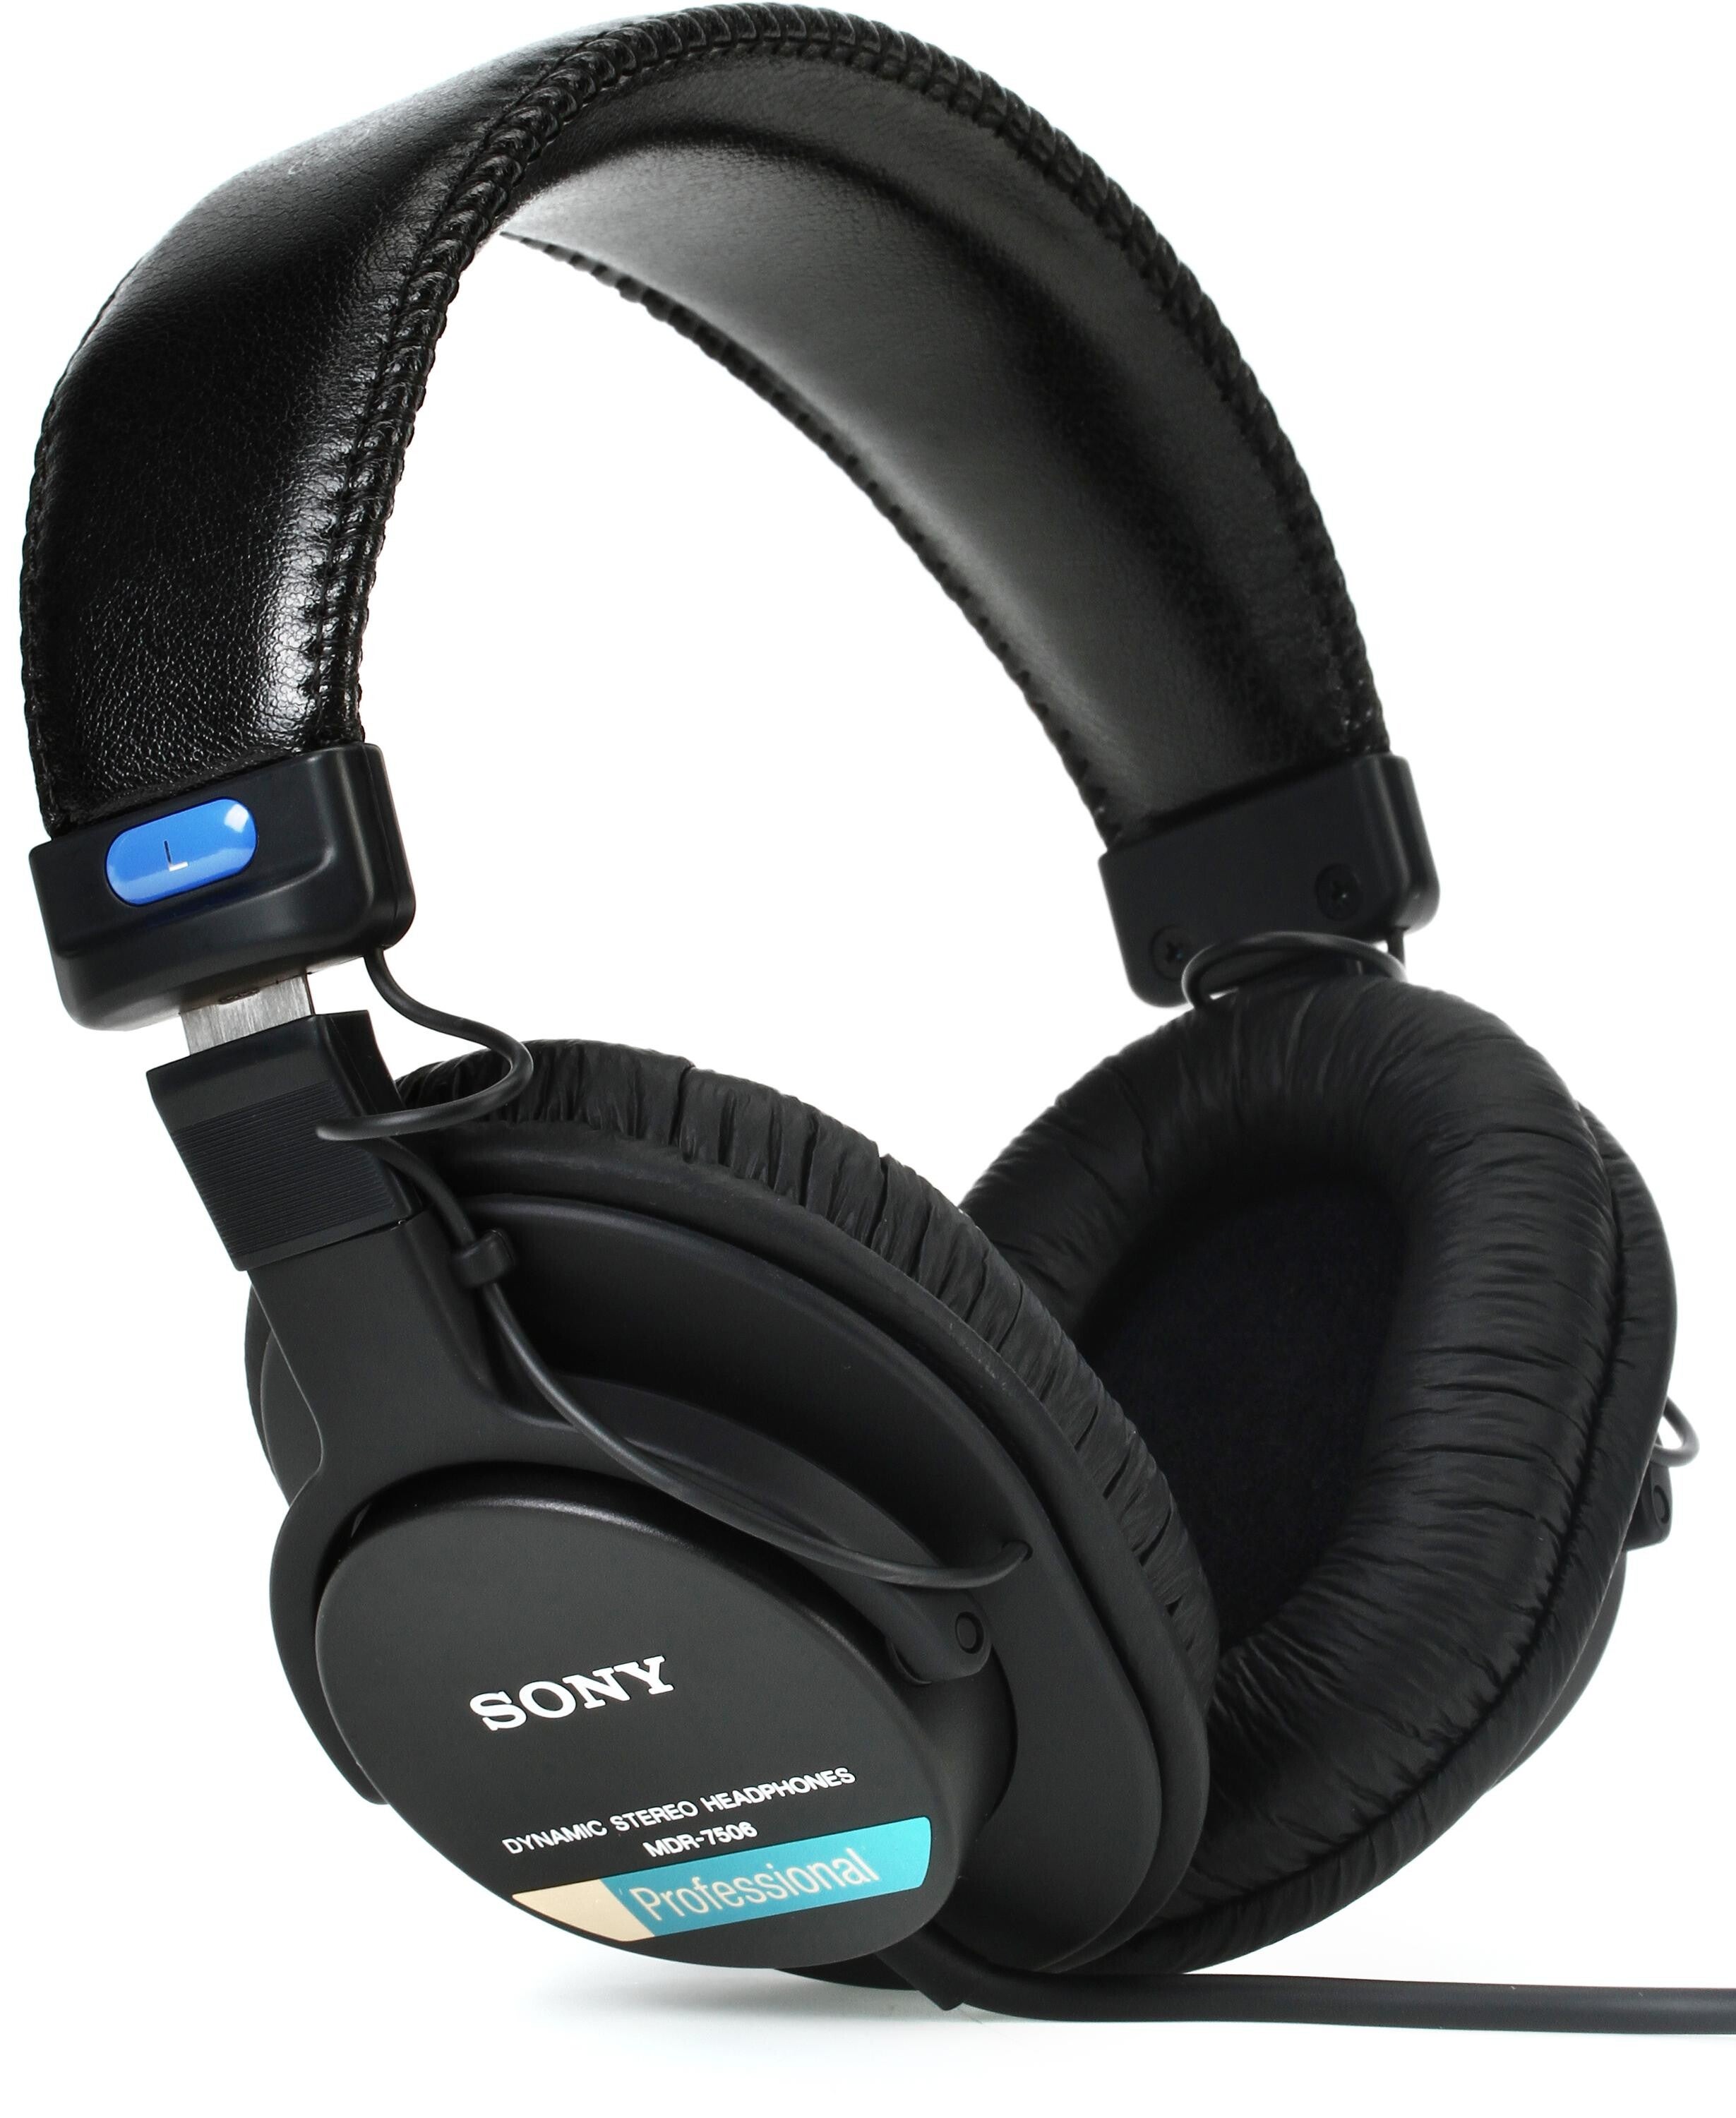 Sony MDR-7506 Closed-Back Professional Headphones | Sweetwater